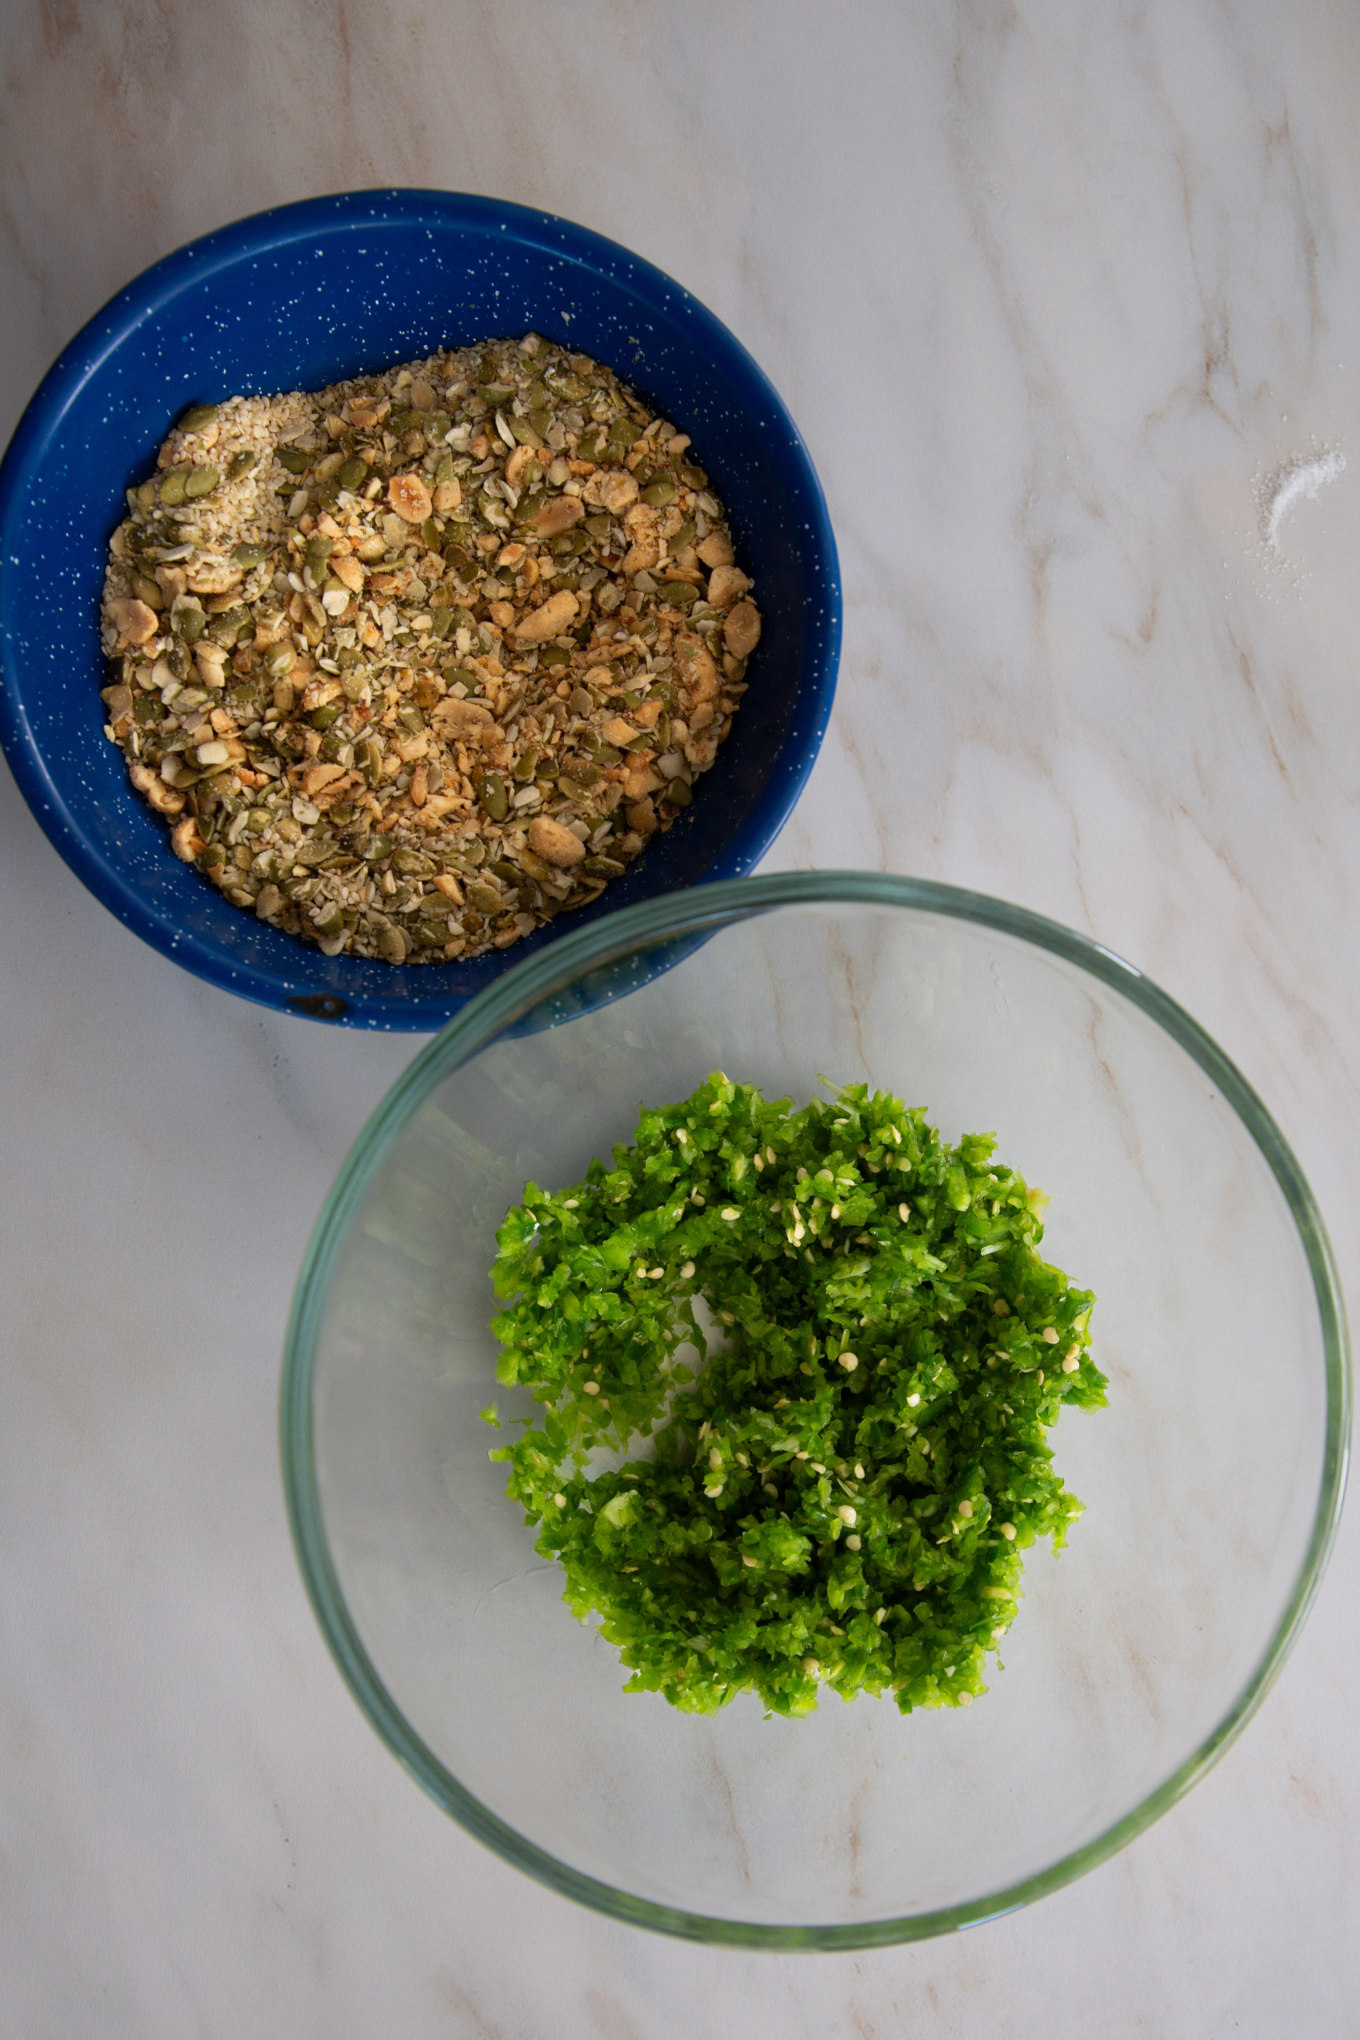 A top-down view of two bowls on a countertop containing chopped nuts and Serrano peppers respectively.